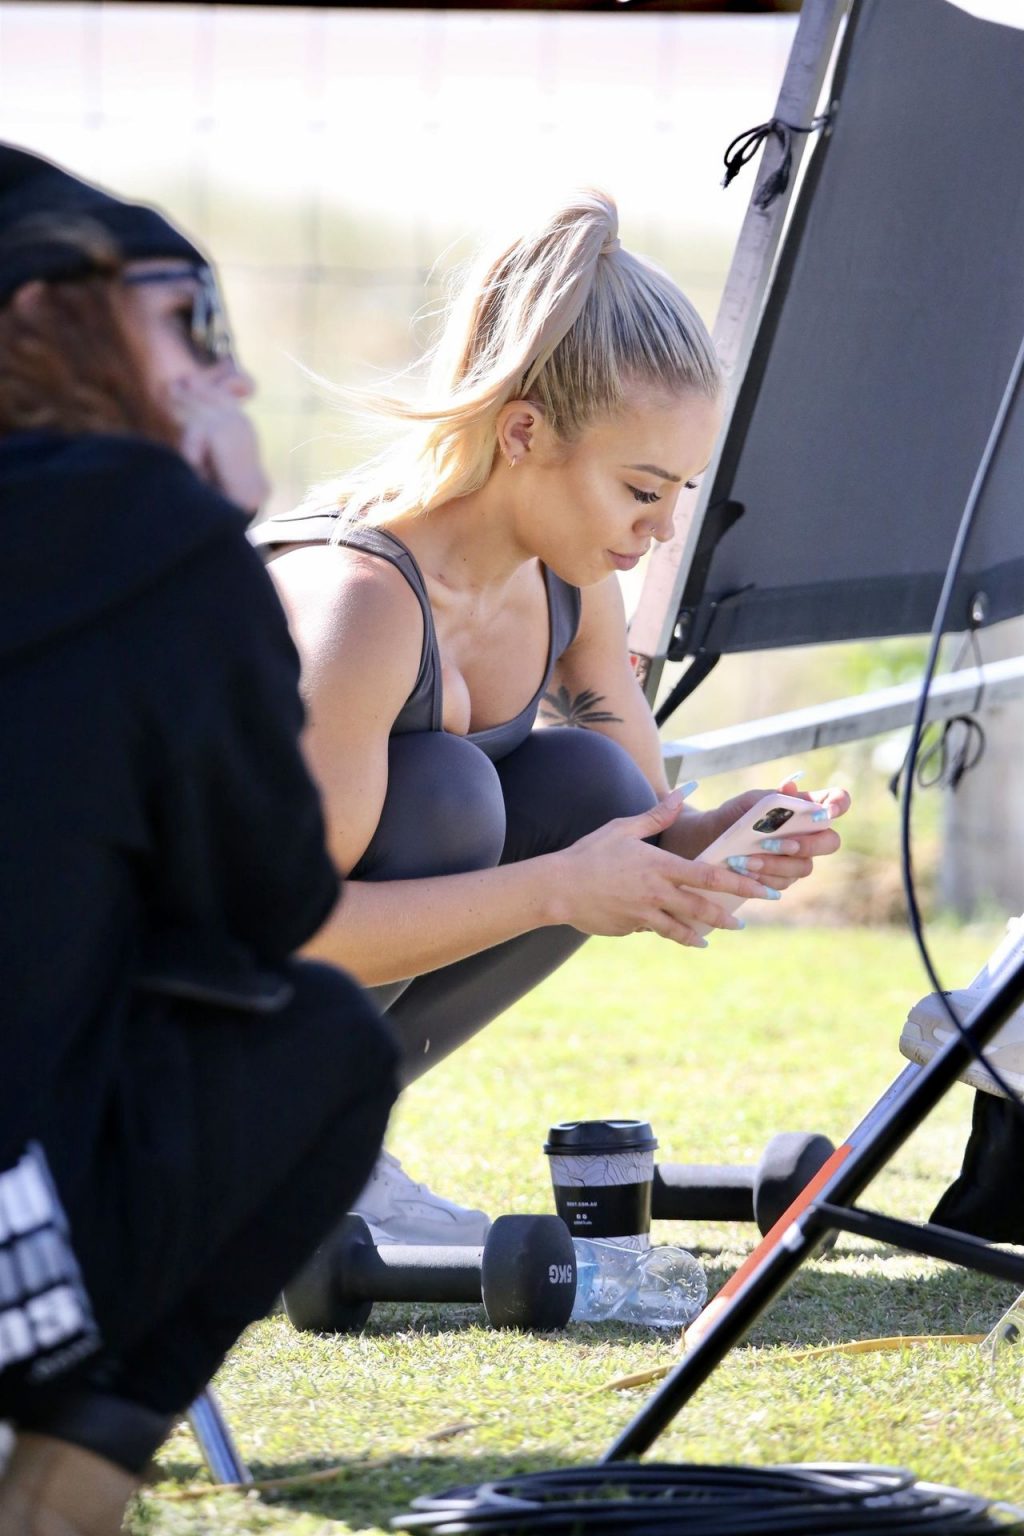 Tammy Hembrow Flaunts Her Sexy Body in a Photoshoot (11 Photos)